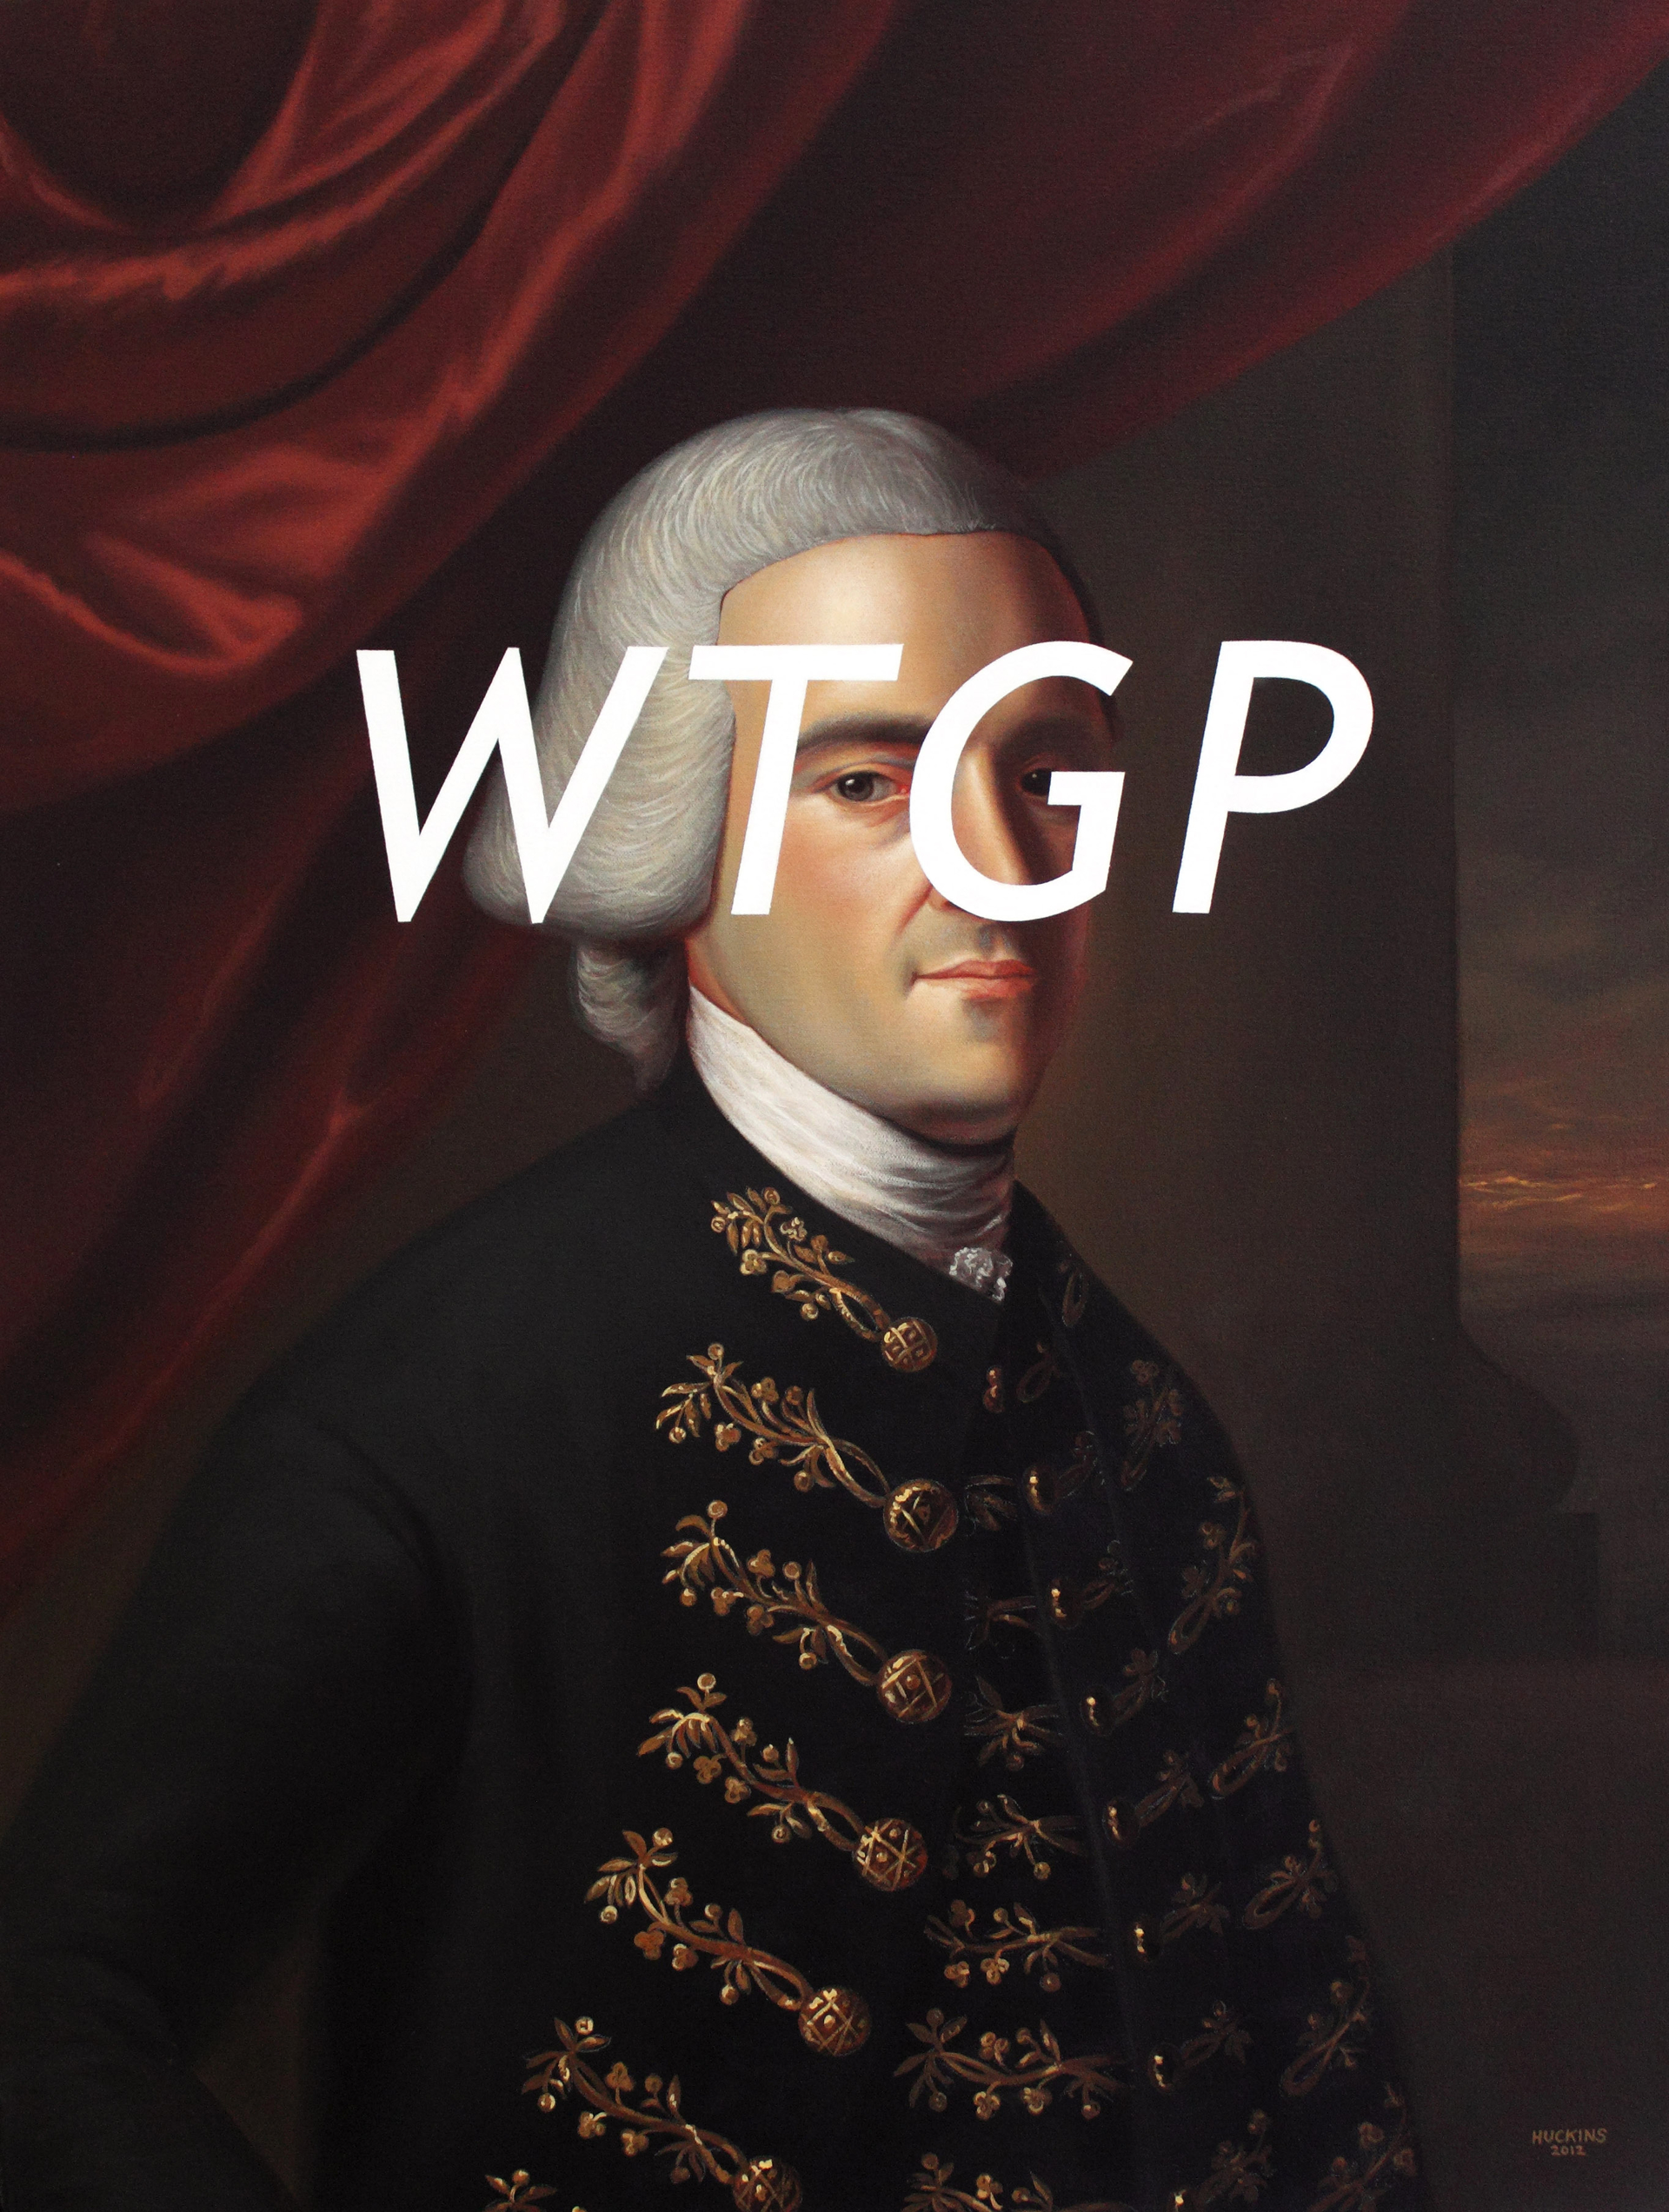 John Hancock: Want To Go Private? by Shawn Huckins